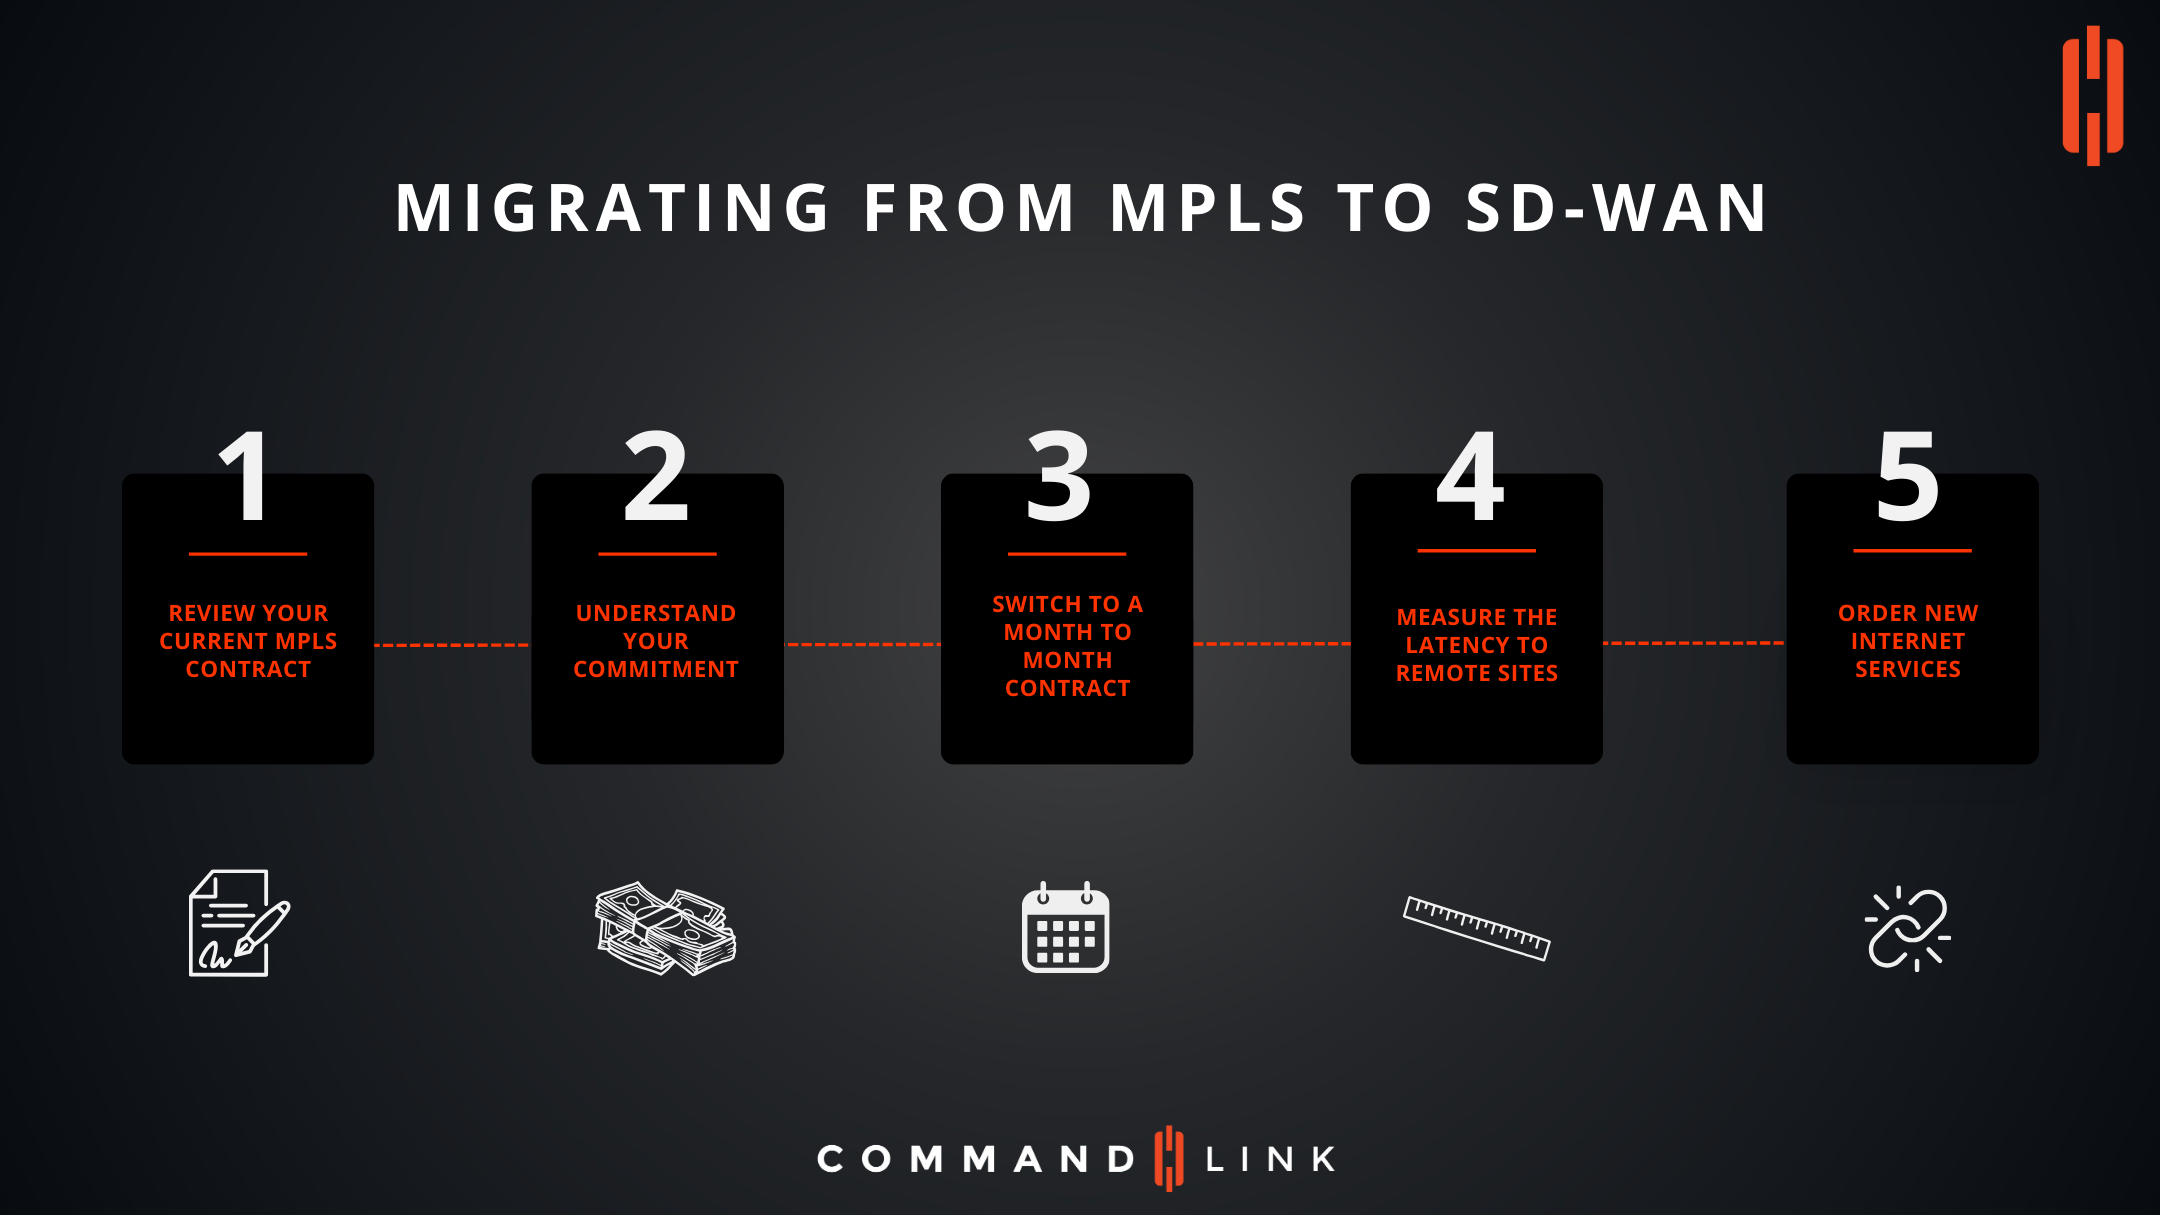 Migrating From MPLS to SD-WAN